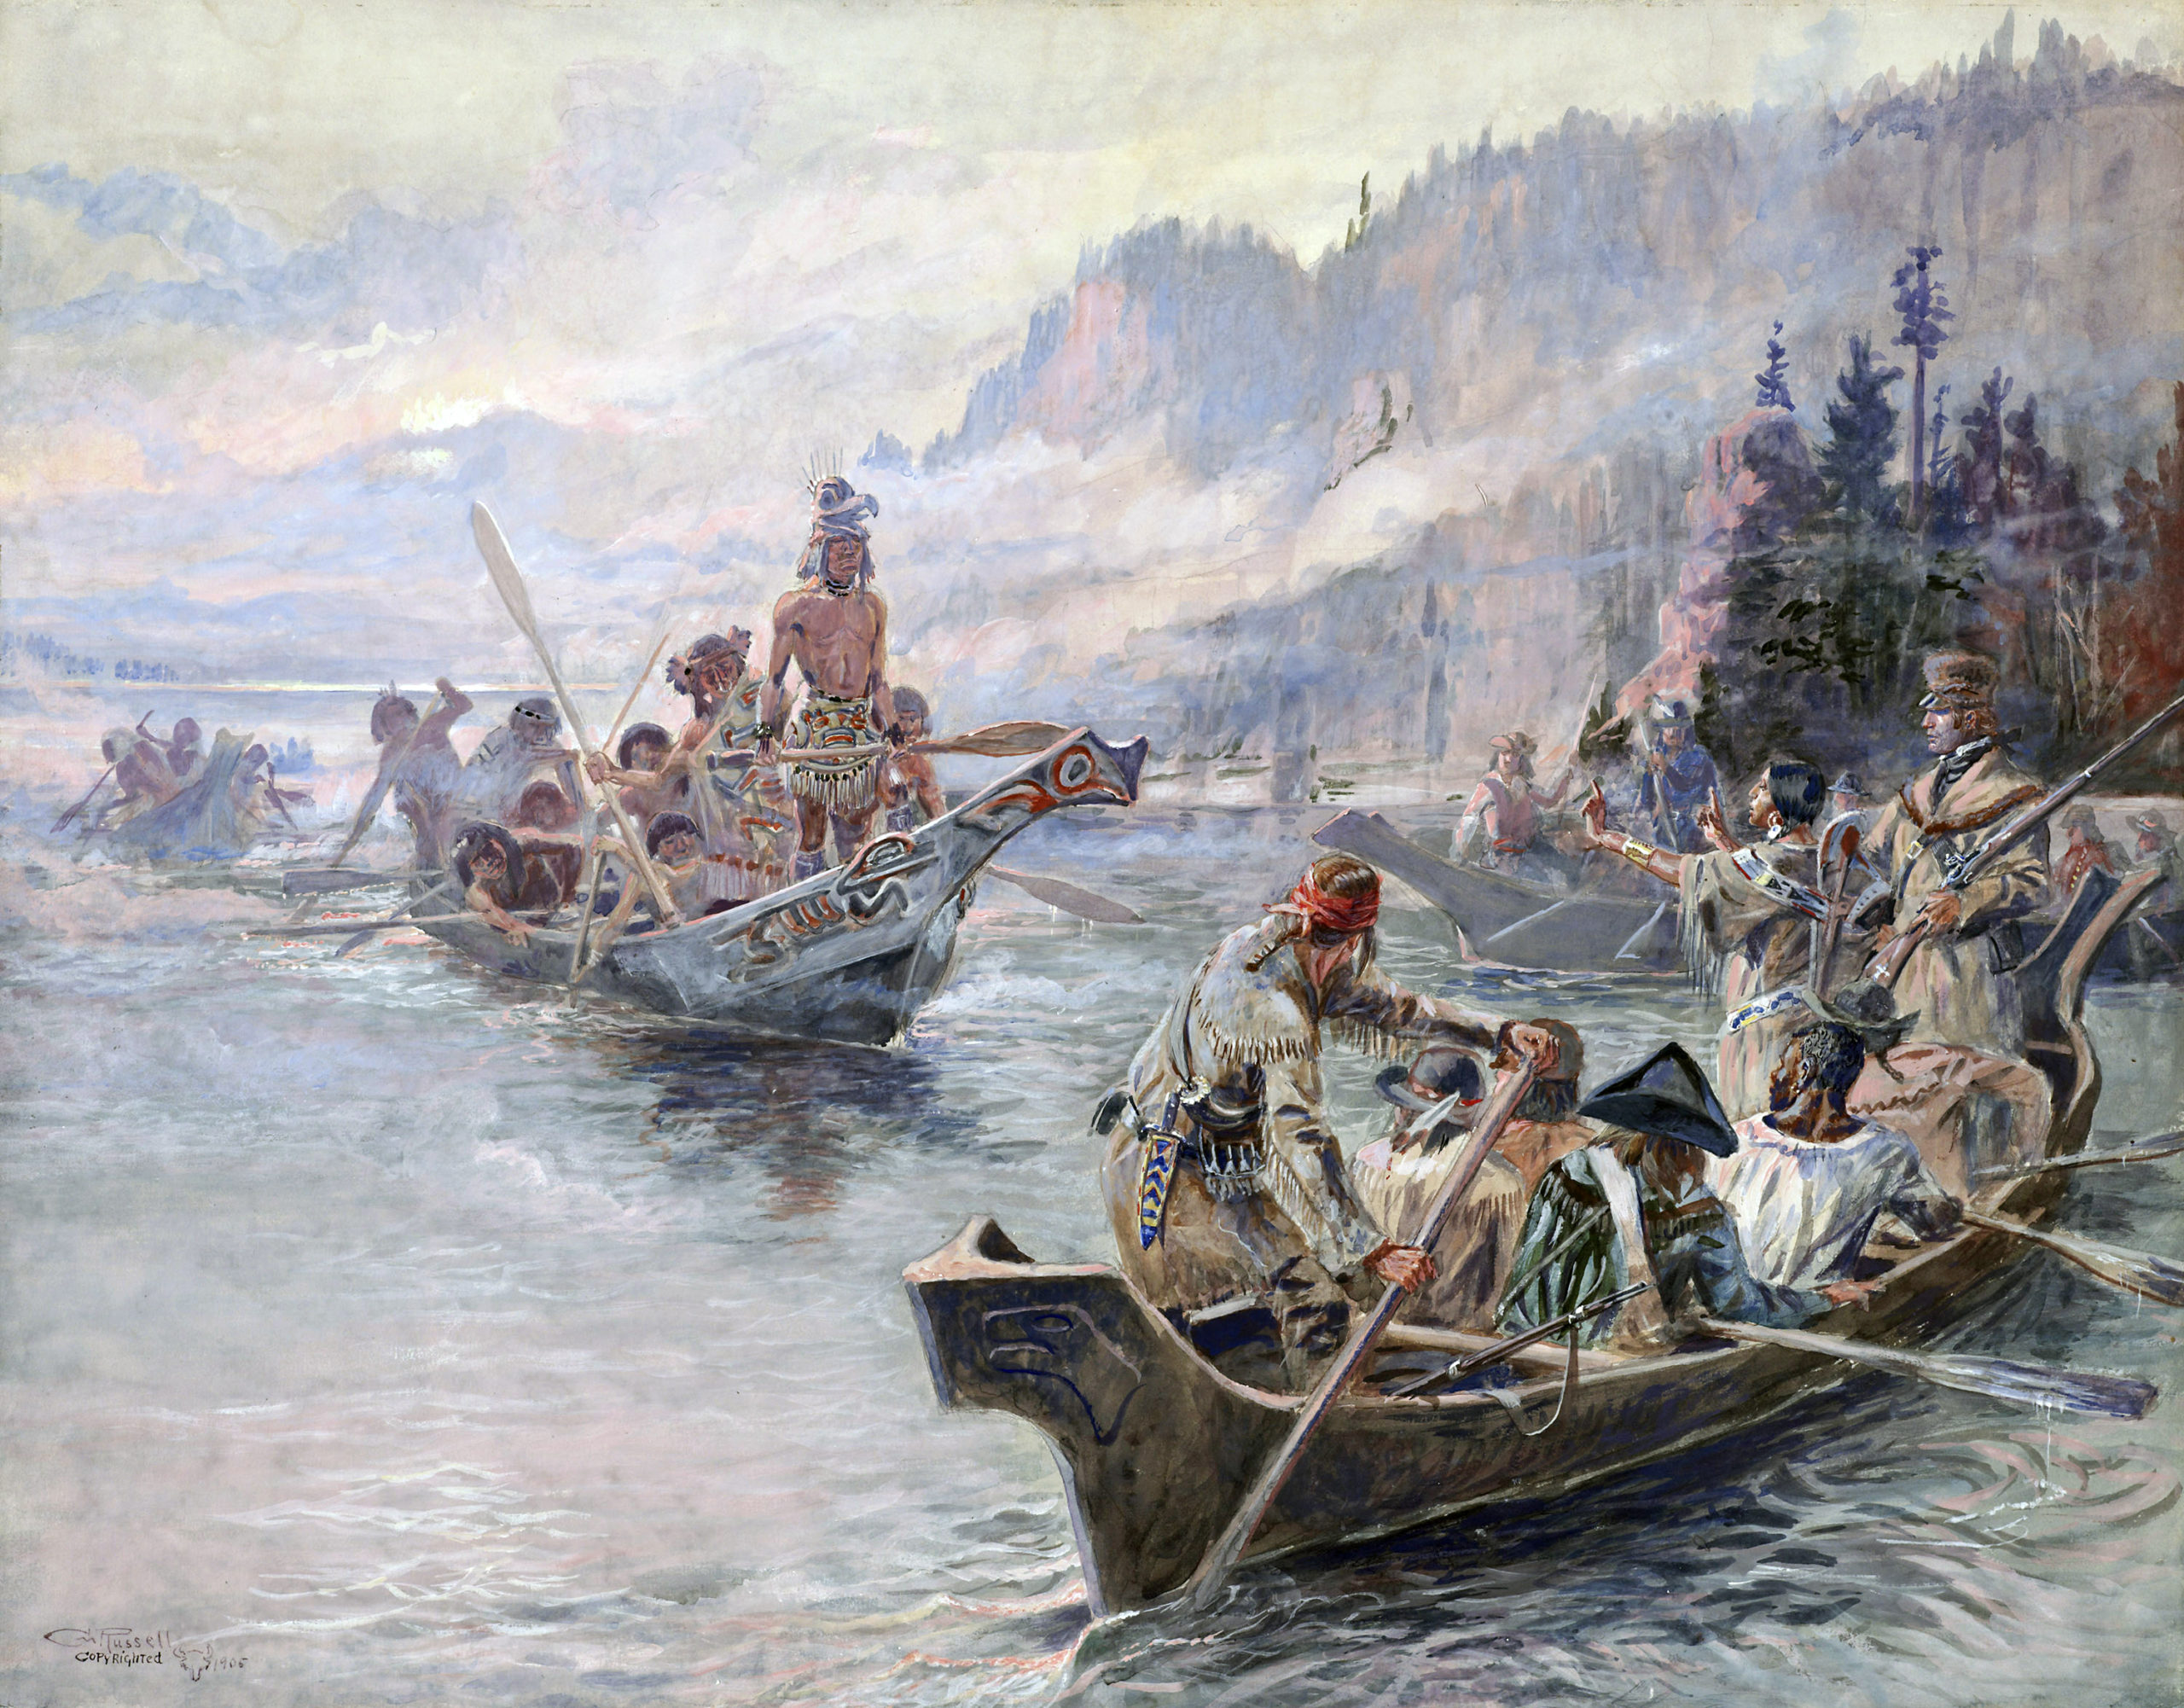 The Lewis And Clarke Expedition